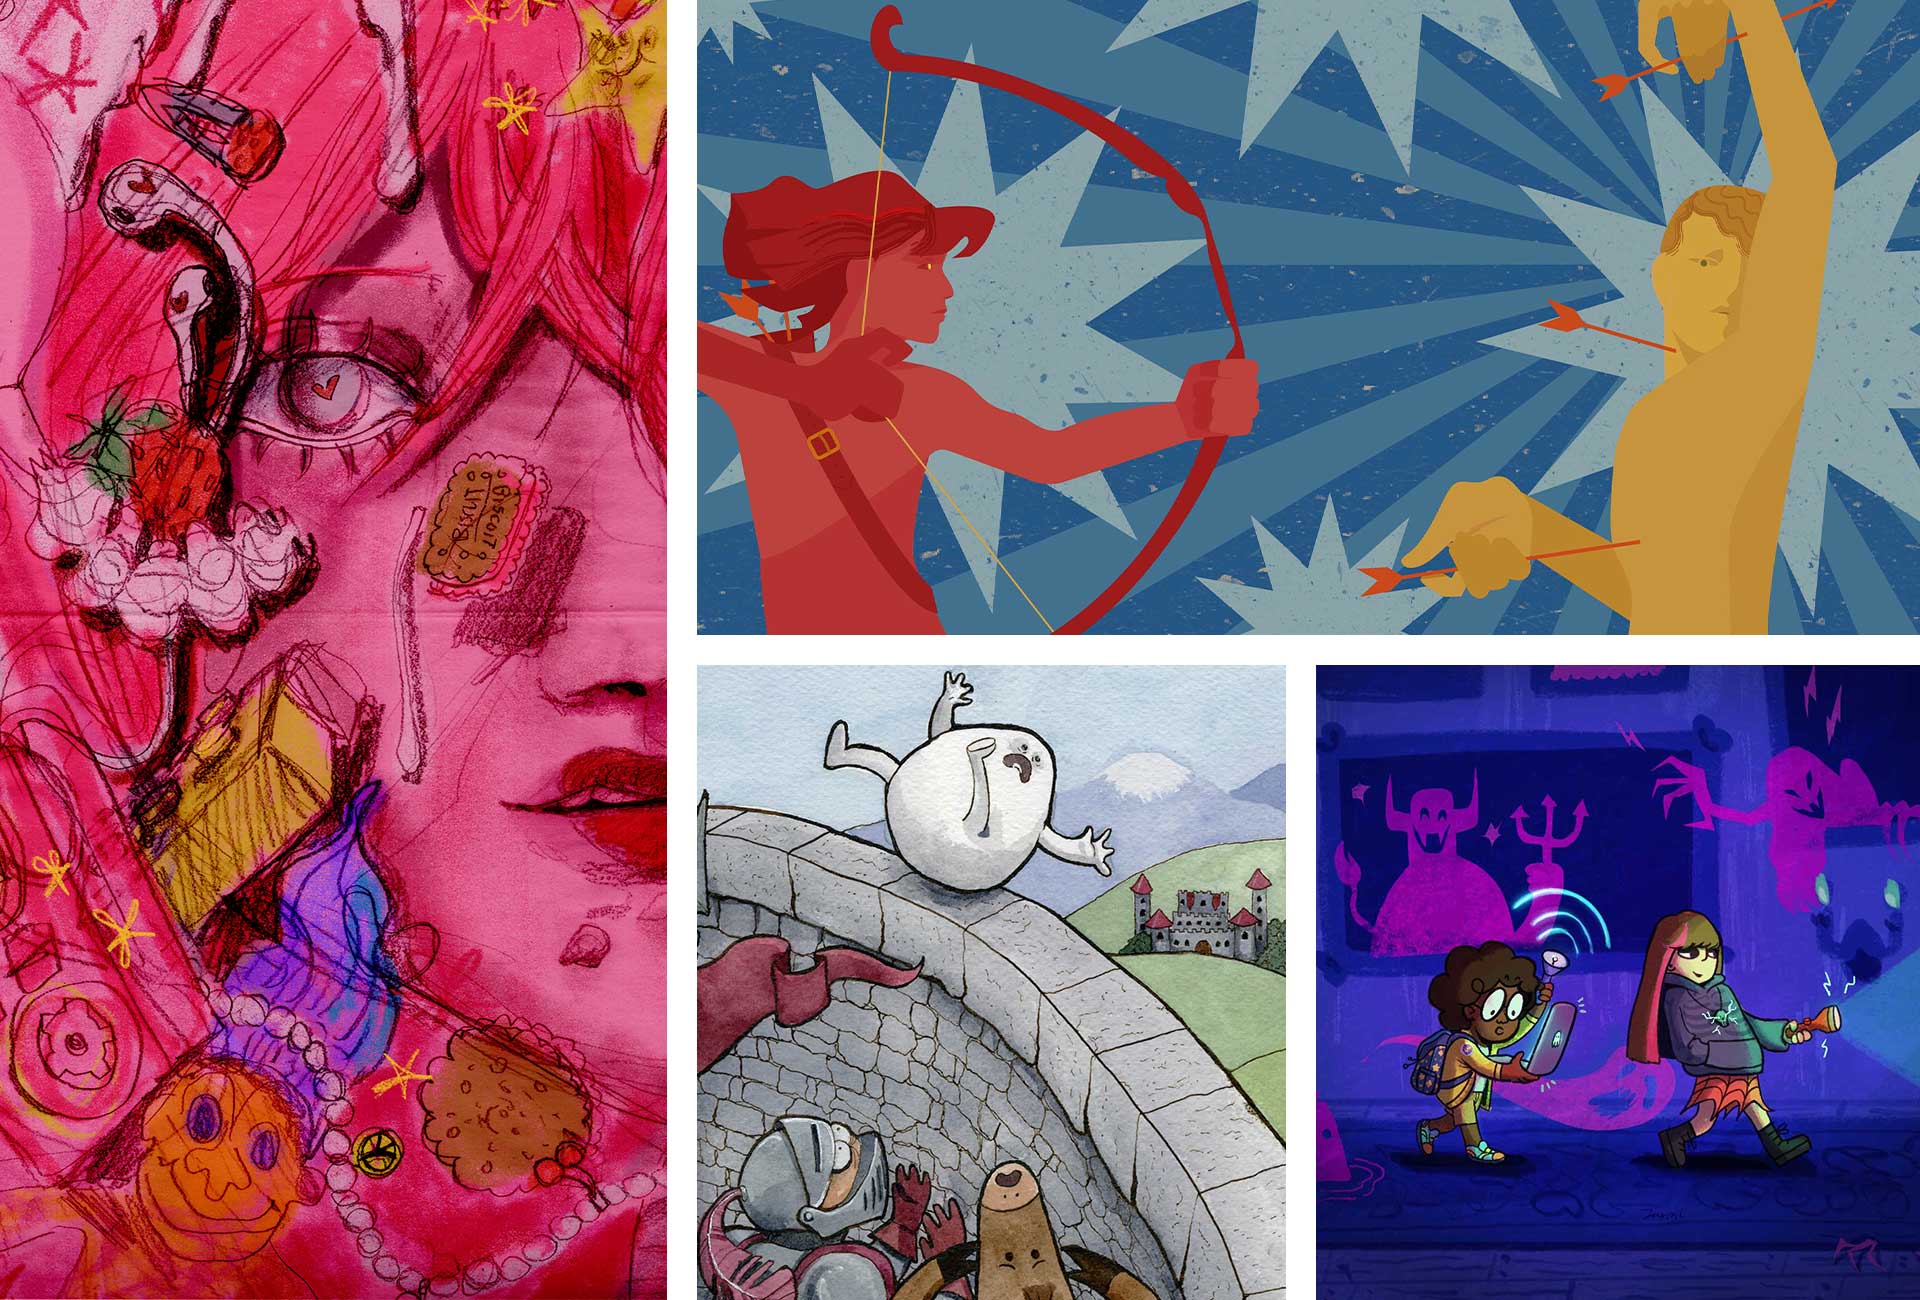 Four illustrations: a close up of a woman’s face surrounded by various objects such as a cassette tape, troll doll, and earbuds; a red figure aiming a bow at a yellow figure with three arrows in their body; Humpty Dumpty falling off a castle wall with a knight and horse watching in dismay; and two young girls exploring a haunted house surrounded by silhouettes of ghosts.